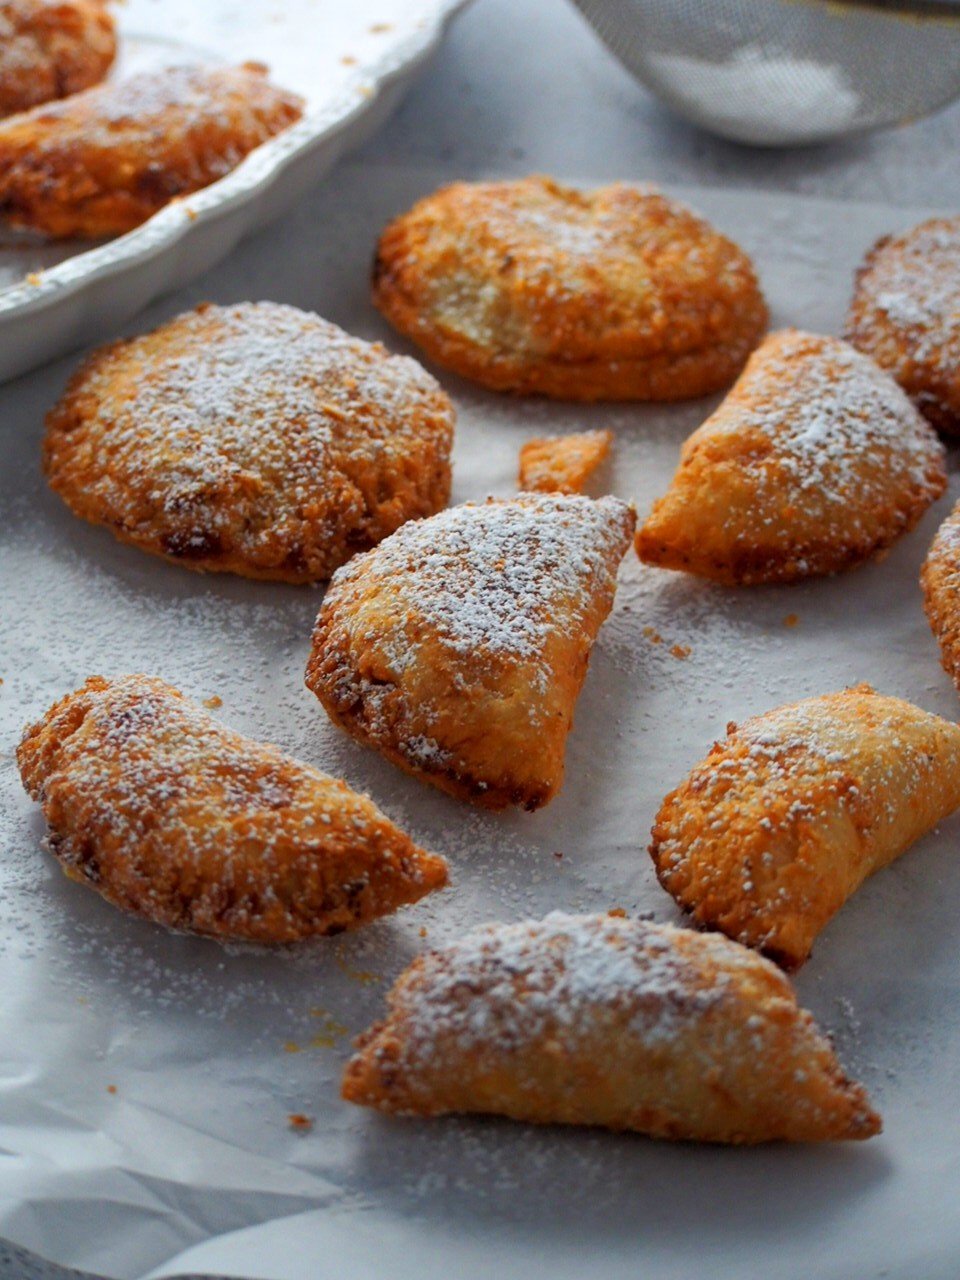 Peach Mango pies freshly fried and dusted with powdered sugar.